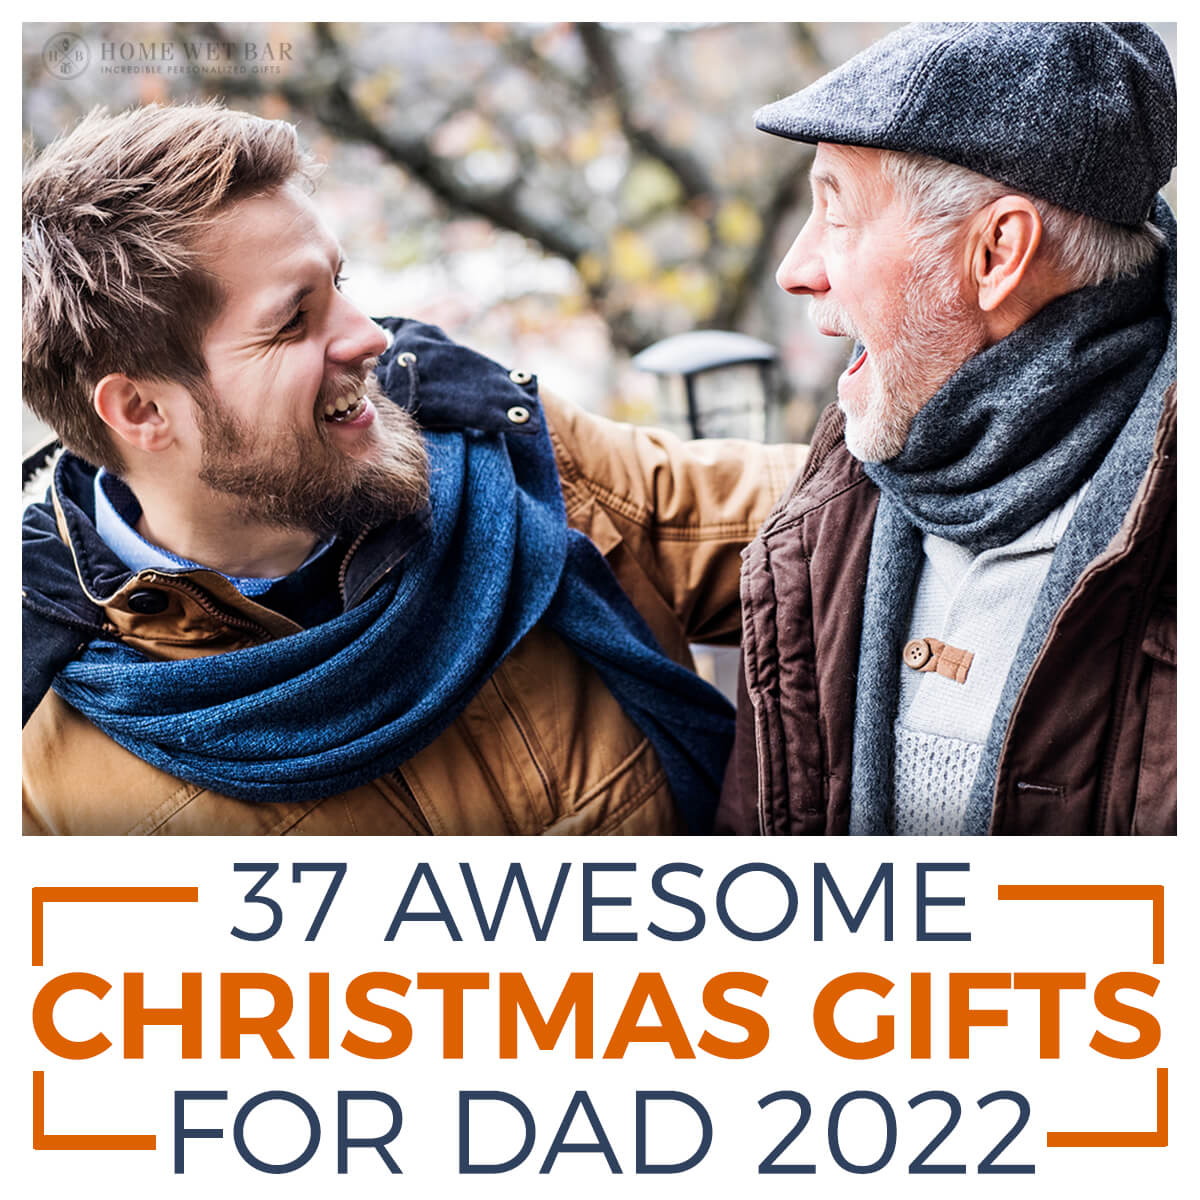 37 AWESOME Christmas Gifts for Dad 2022